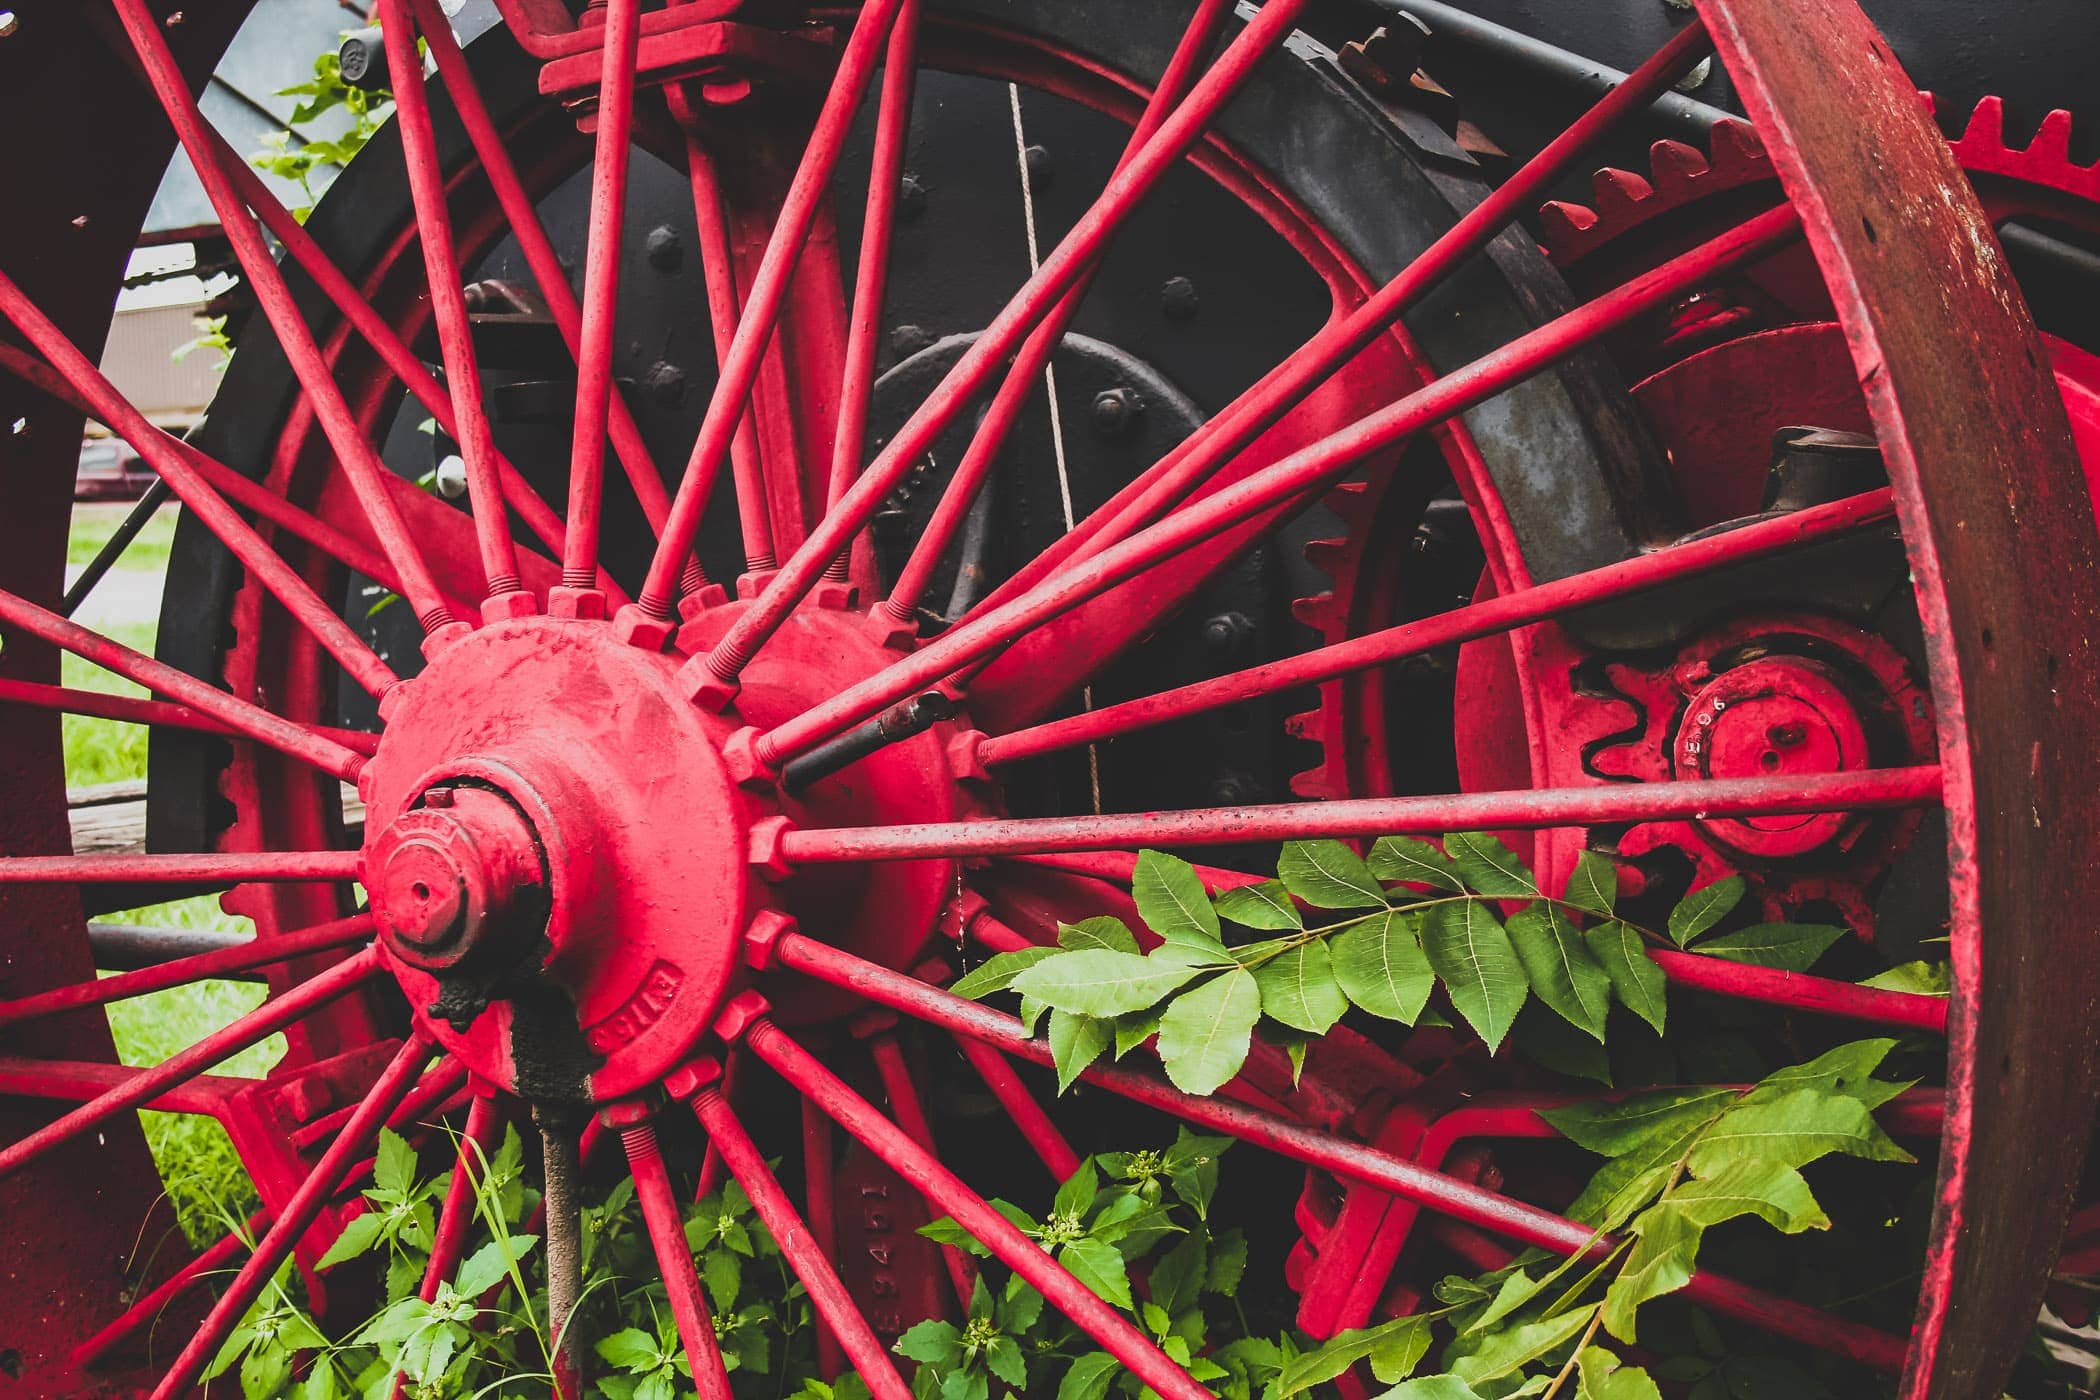 The wheel of an antique tractor found in Marietta, Oklahoma.